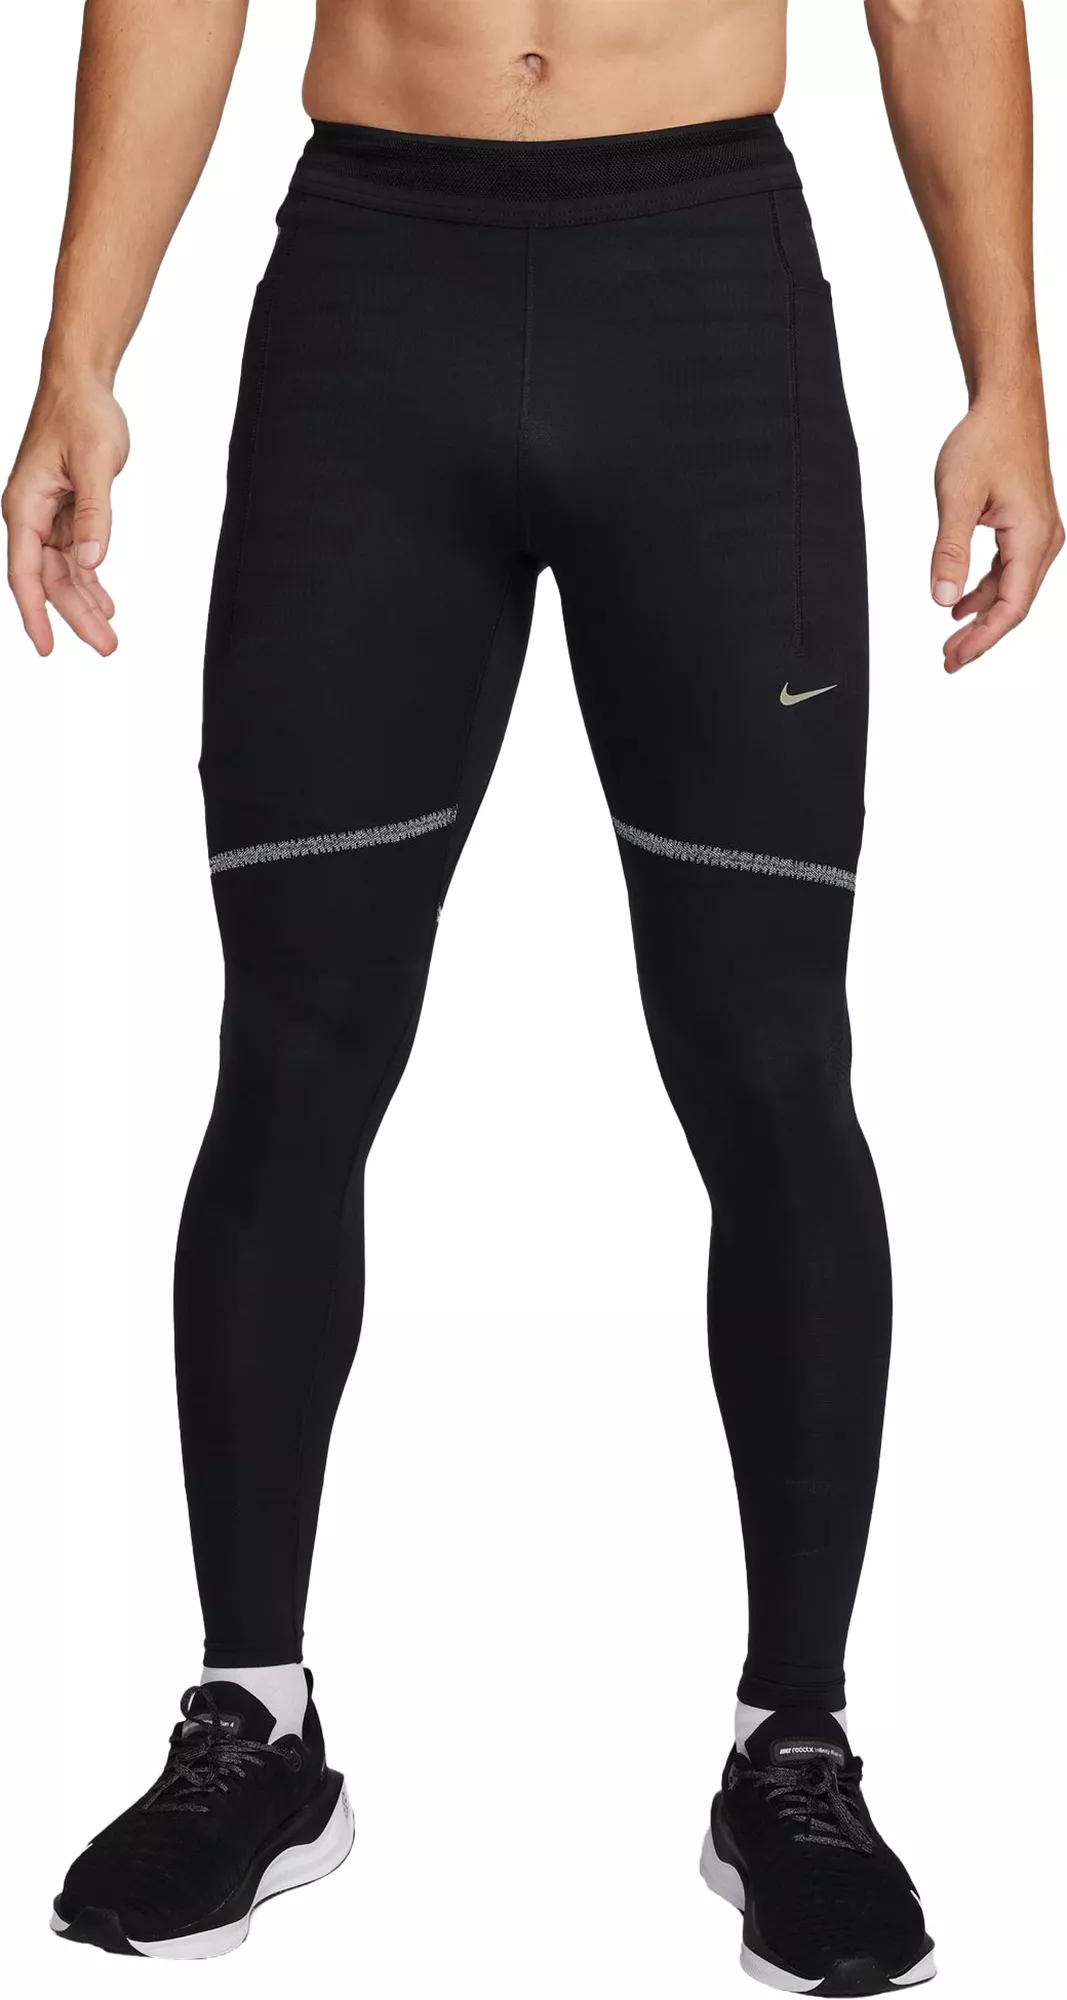 How to Choose Running Tights